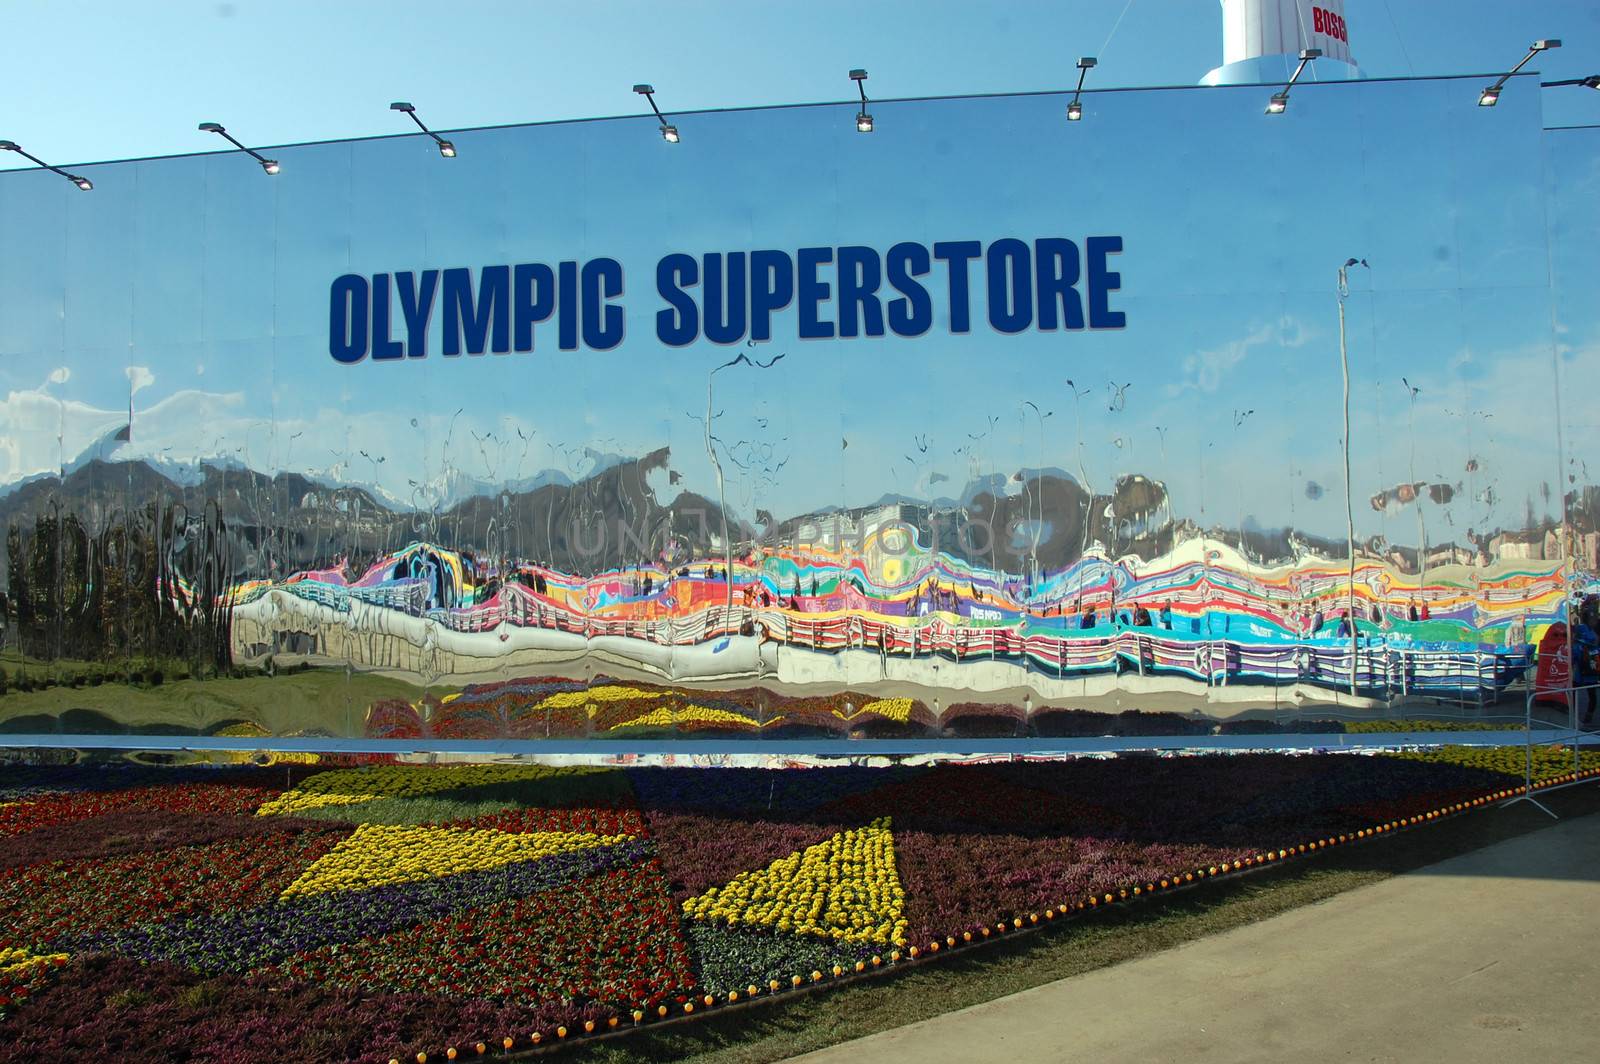 Olympic surerstore mirror wall at XXII Winter Olympic Games Soch by danemo